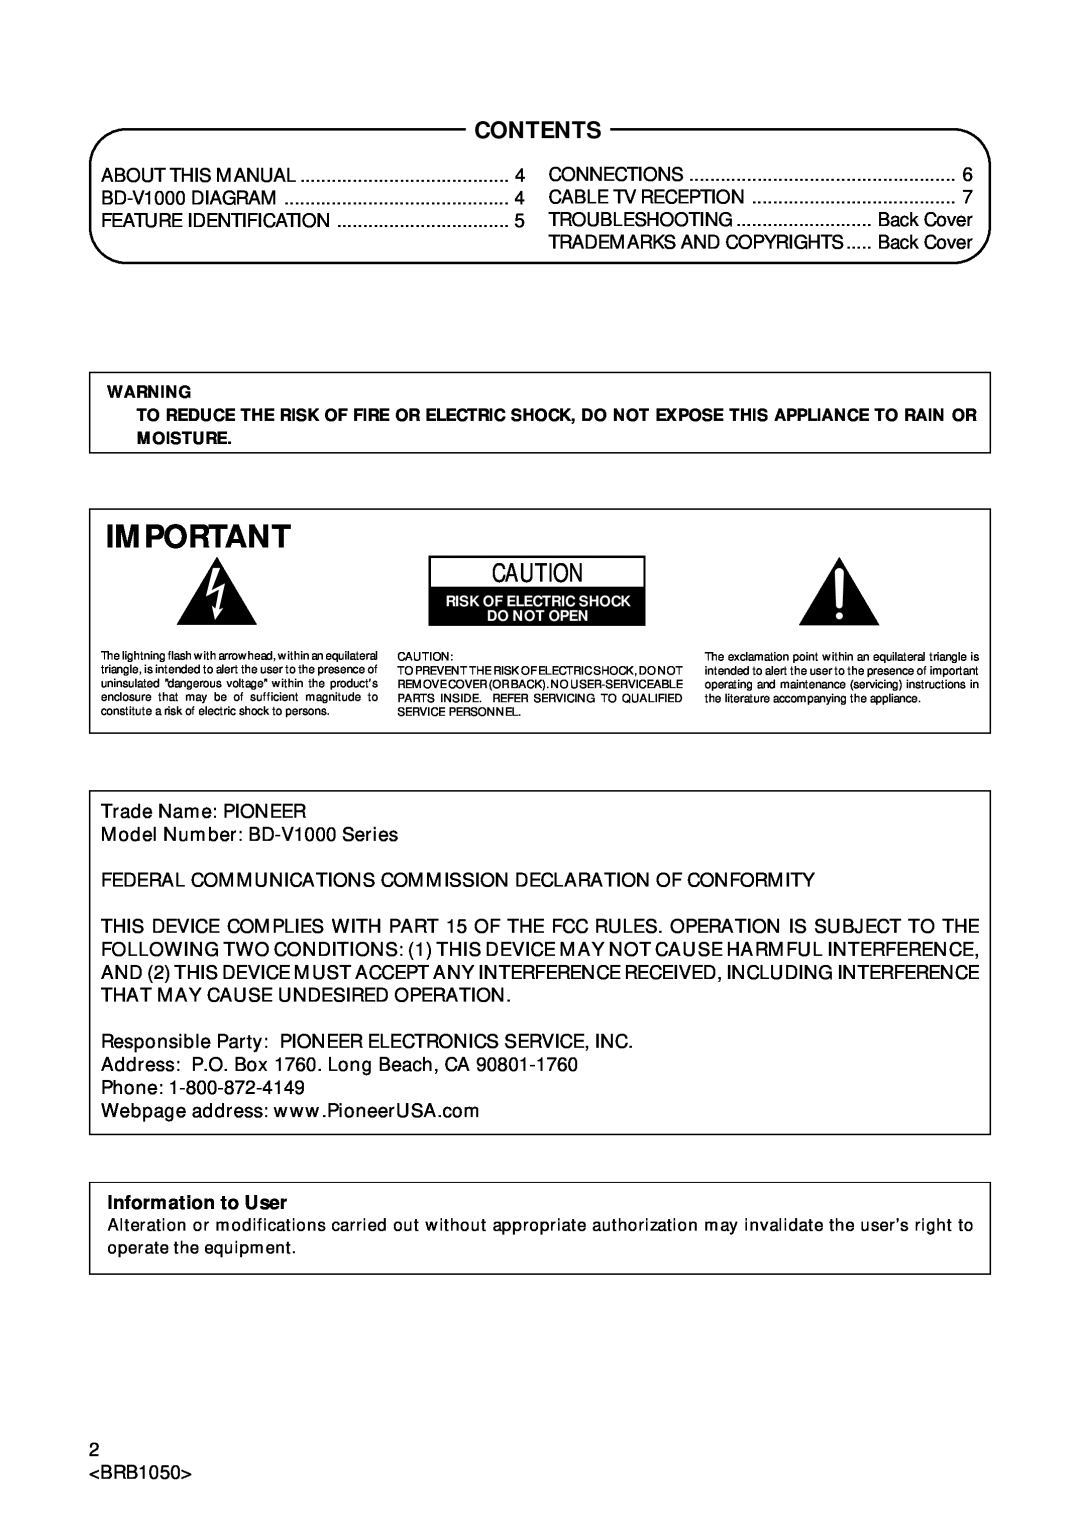 Pioneer Industrial BD-V1000 Series operating instructions Contents, Information to User 